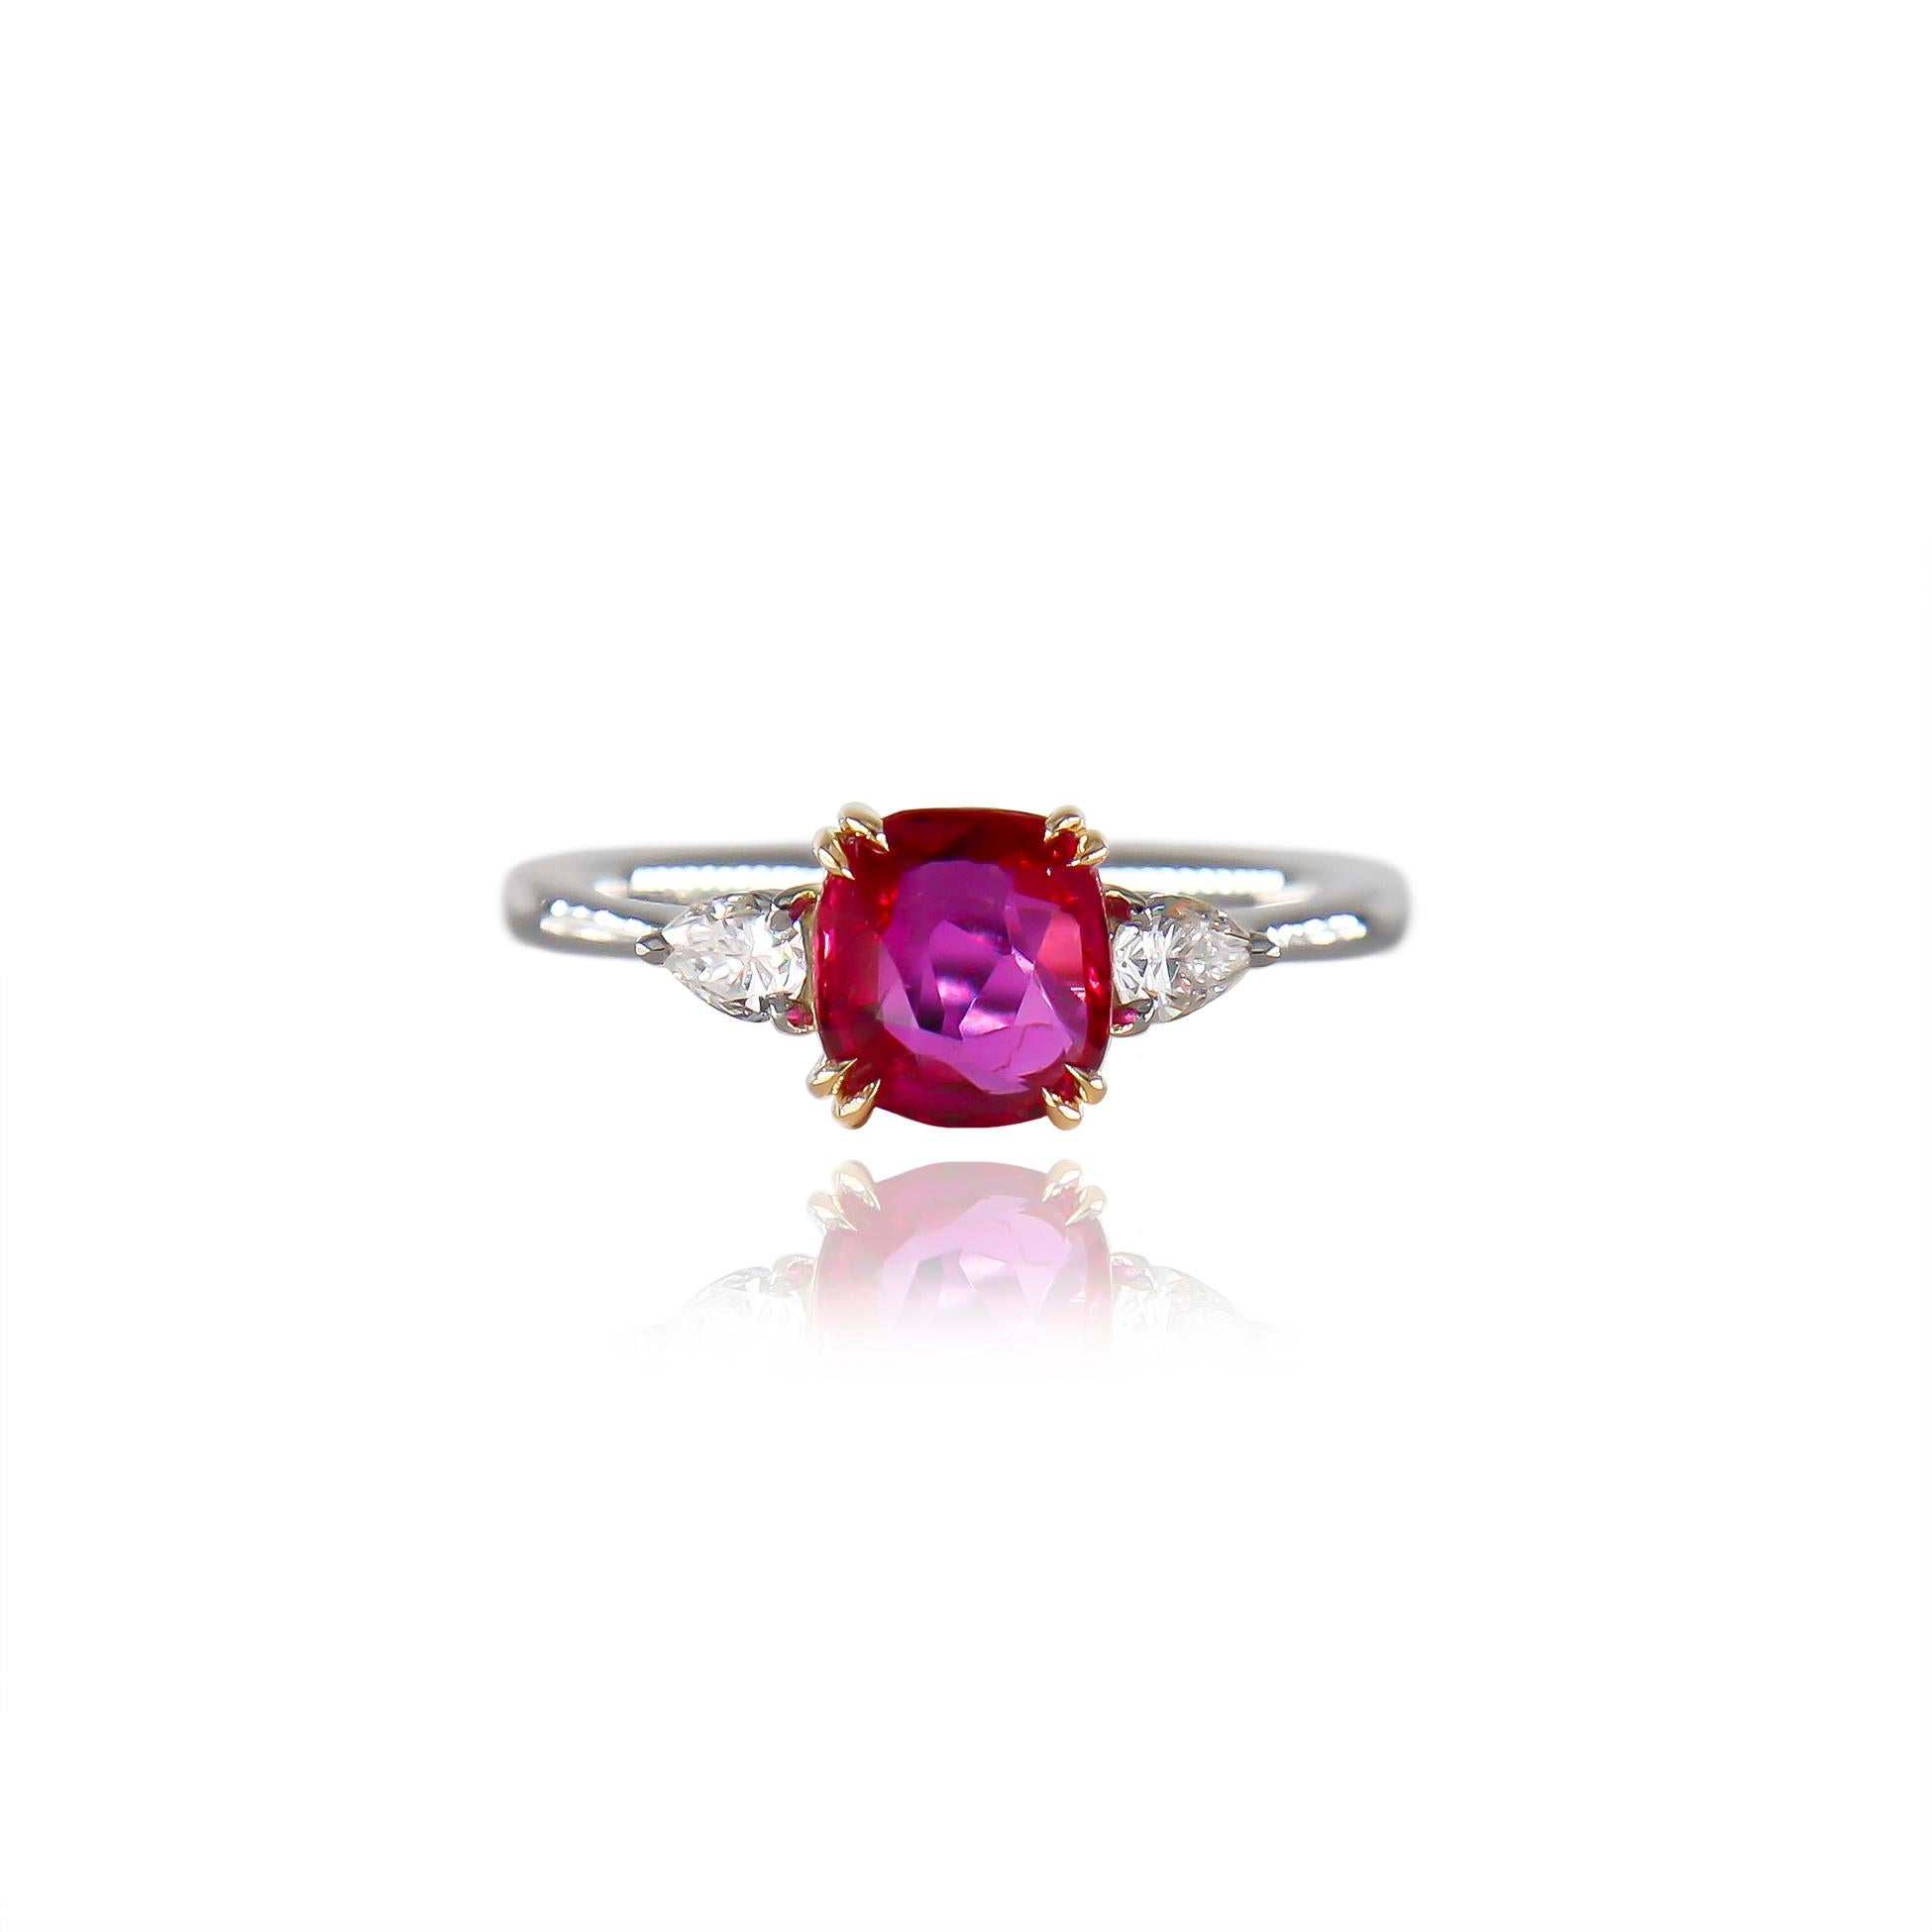 This incredible, fresh execution from the J. Birnbach workshop features an AGS certified 1.29 carat pinkish-red ruby of Burmese origin with NO heat treatment. Set in a platinum and 18K yellow gold, three-stone ring with pear brilliant cut diamonds